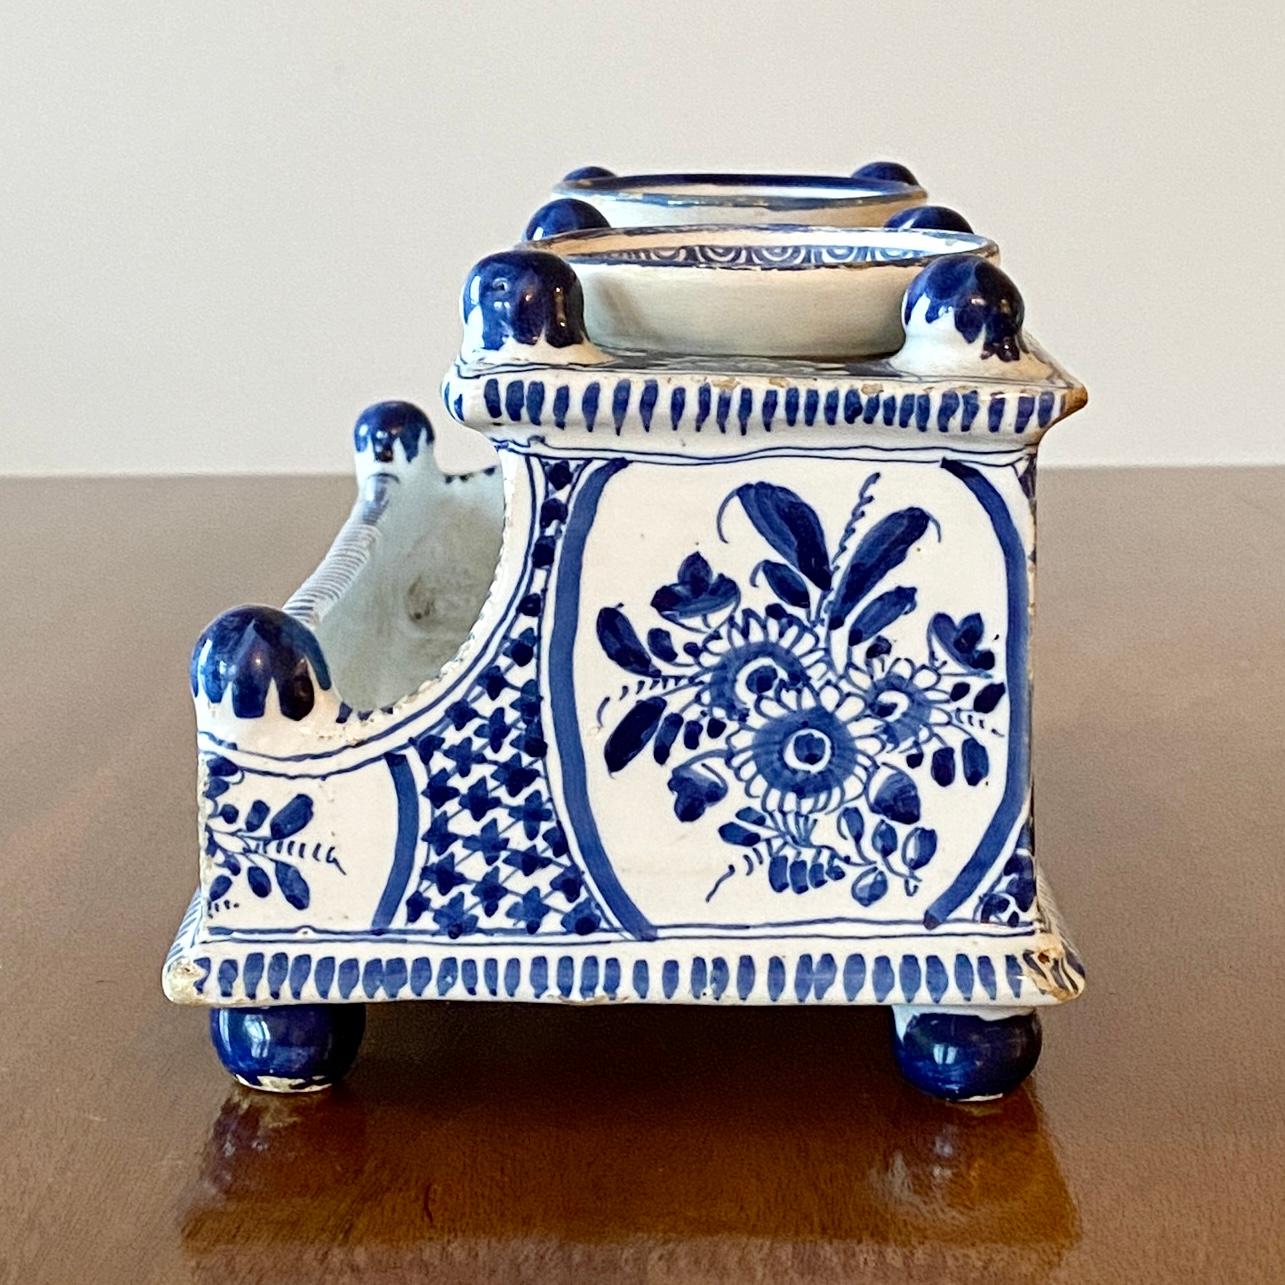 Danish 18th Century Blue Faience Inkwell by Store Kongensgade For Sale 7